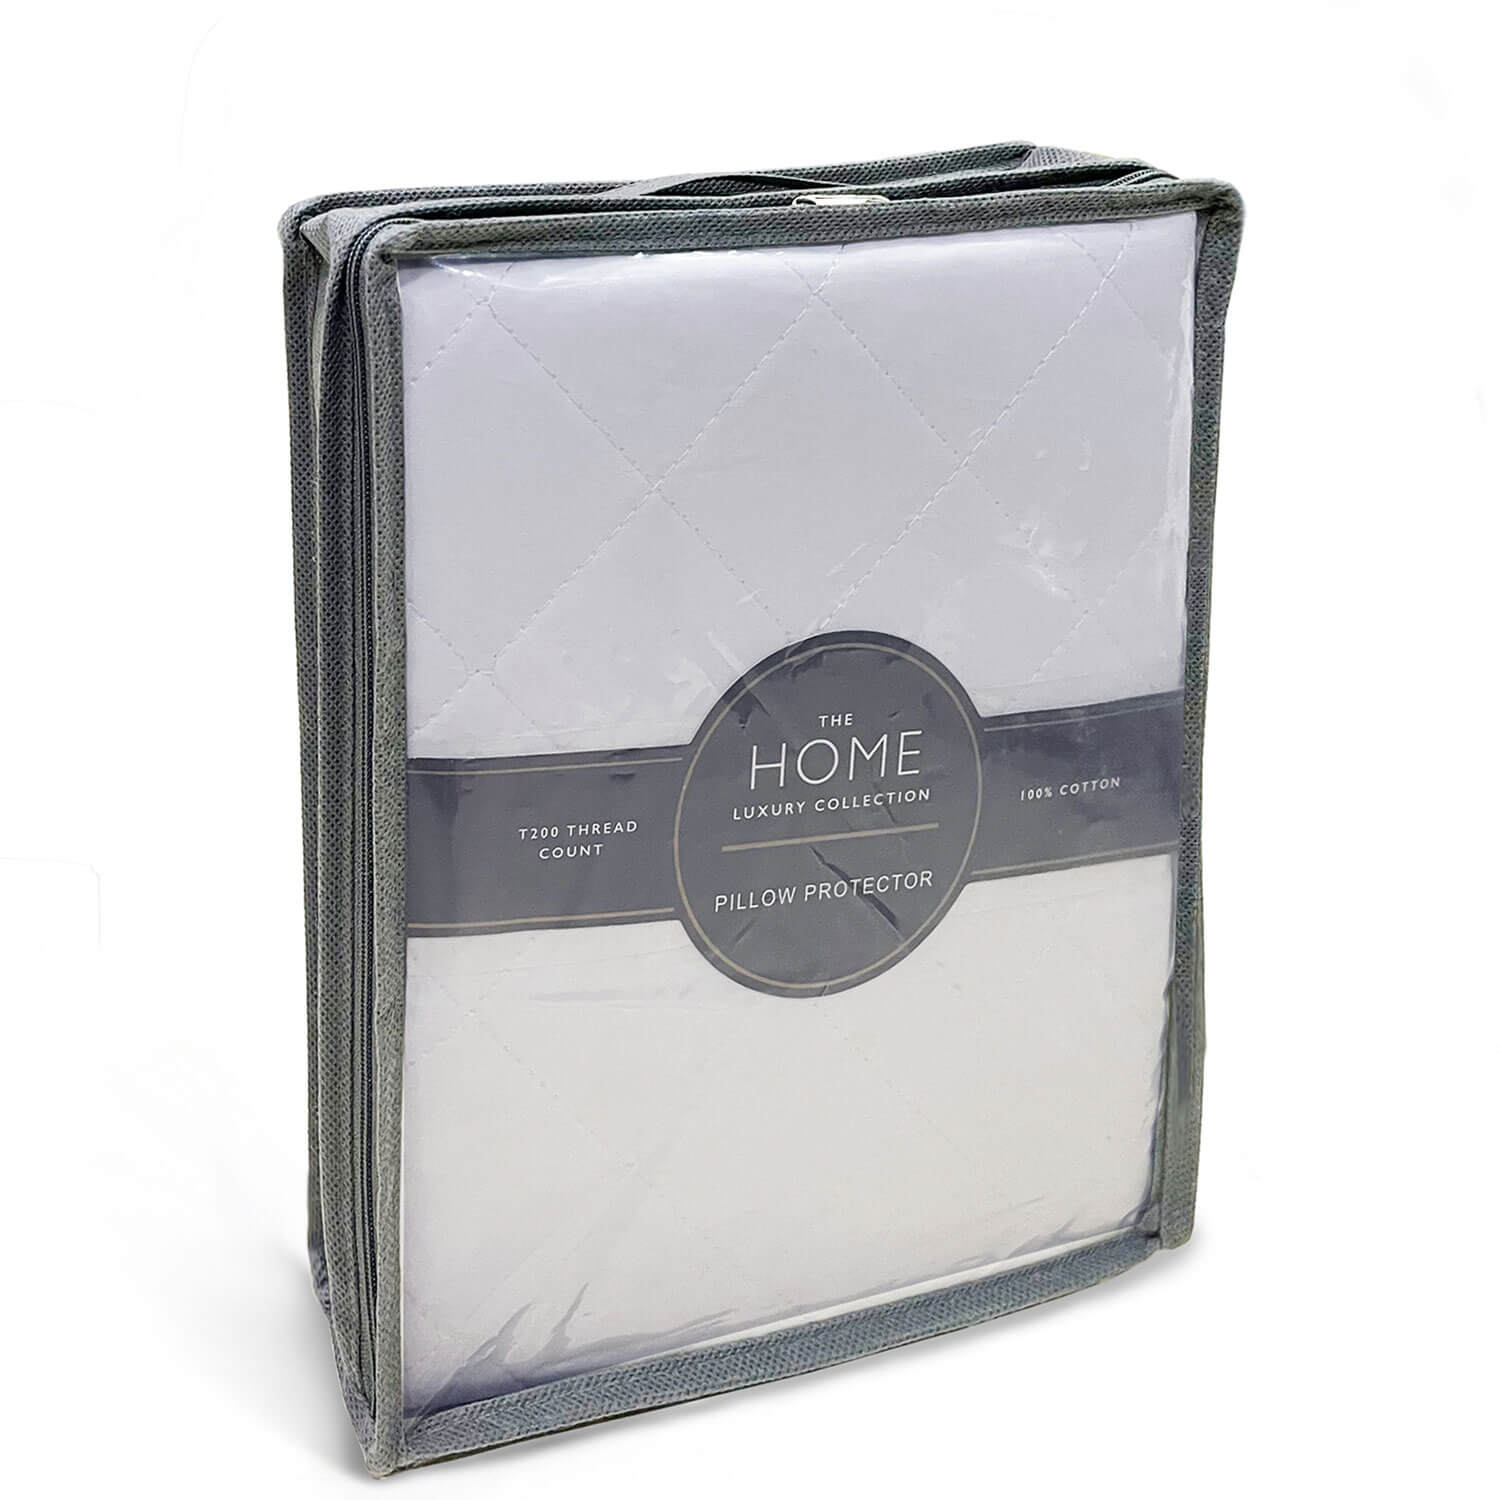 The Home Luxury Collection All Cotton Pillow Protector - White 1 Shaws Department Stores